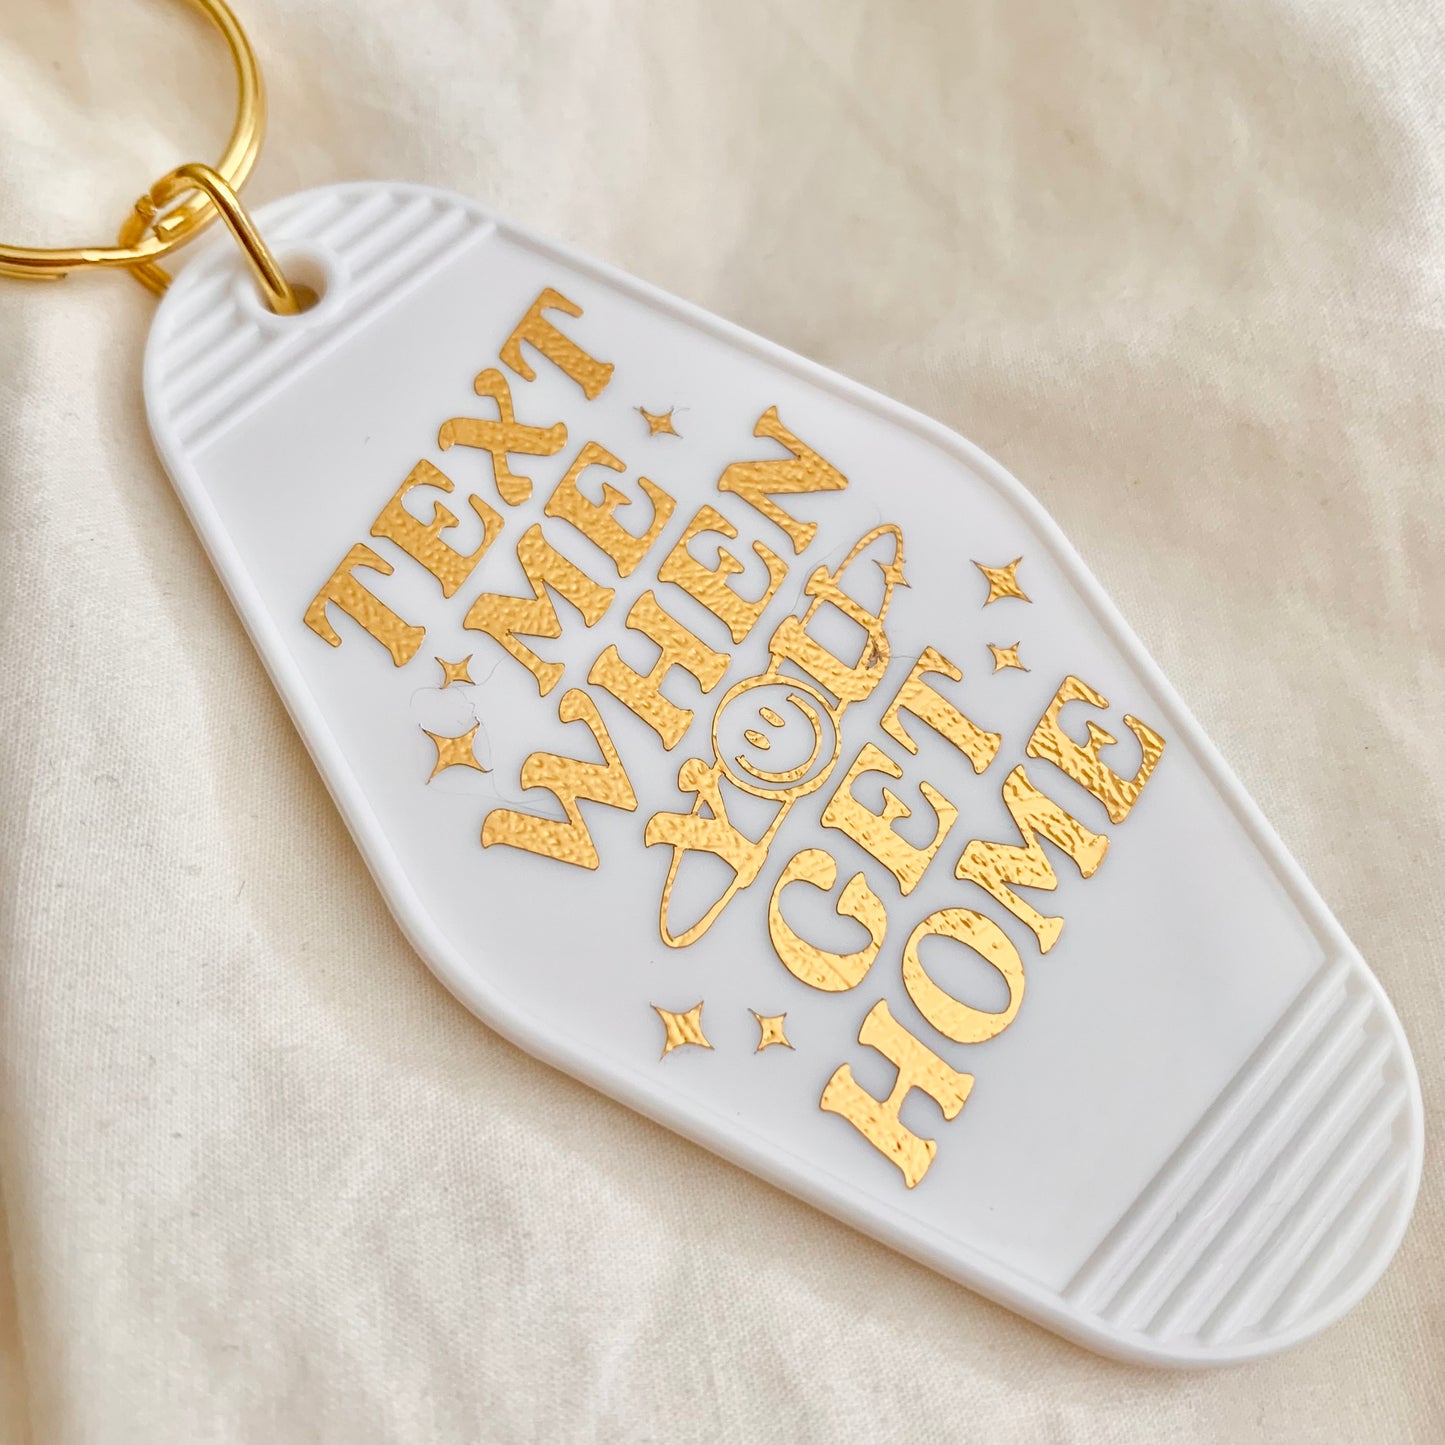 "Text Me When You Get Home" | Retro Motel Keychain